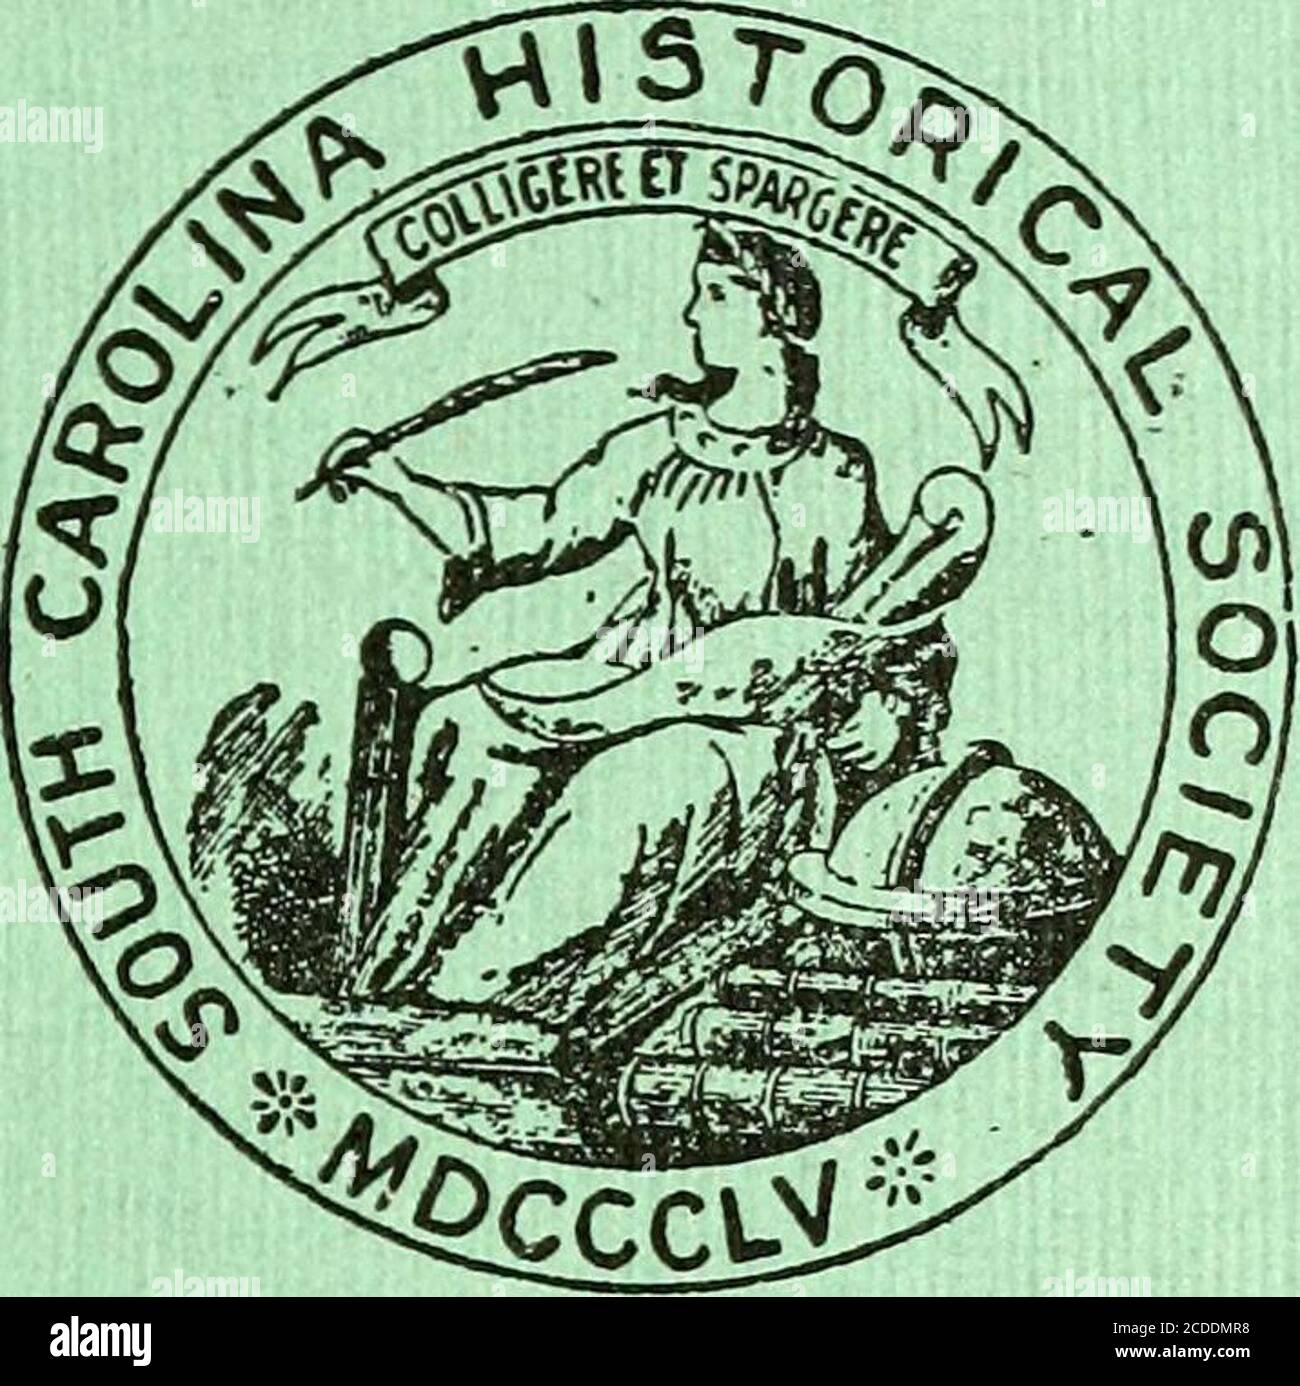 . The South Carolina historical and genealogical magazine . ery library. (Contributed by D. E. Hugcr Suiith.) LIST OF PUBLICATIONS OF THH SOUTH CAROLINA HISTORICAL SOCIETY, COLLECTIONS. Vol L, 1857, $3.00; Vol II., 1858, $3.00; Vol. Ill,1859, out of print. Vol IV., 1887, unbound, $3.00, bound,$4.00; Vol. v., 1897, paper, $3.00. PAMPHLETS. Journal of a Voyage to Charlestown in So. Caro-lina by Pelatiah Webster in 1765. Edited by Prof. T.P. Harrison, 1898. 75c. The History of the Santee Canal. By Prof. F. A.Porcher. With an Appendix by A. S. Salley, Jr., 1903. 75c. THE SOUTH CAROLINA HISTORICAL Stock Photo